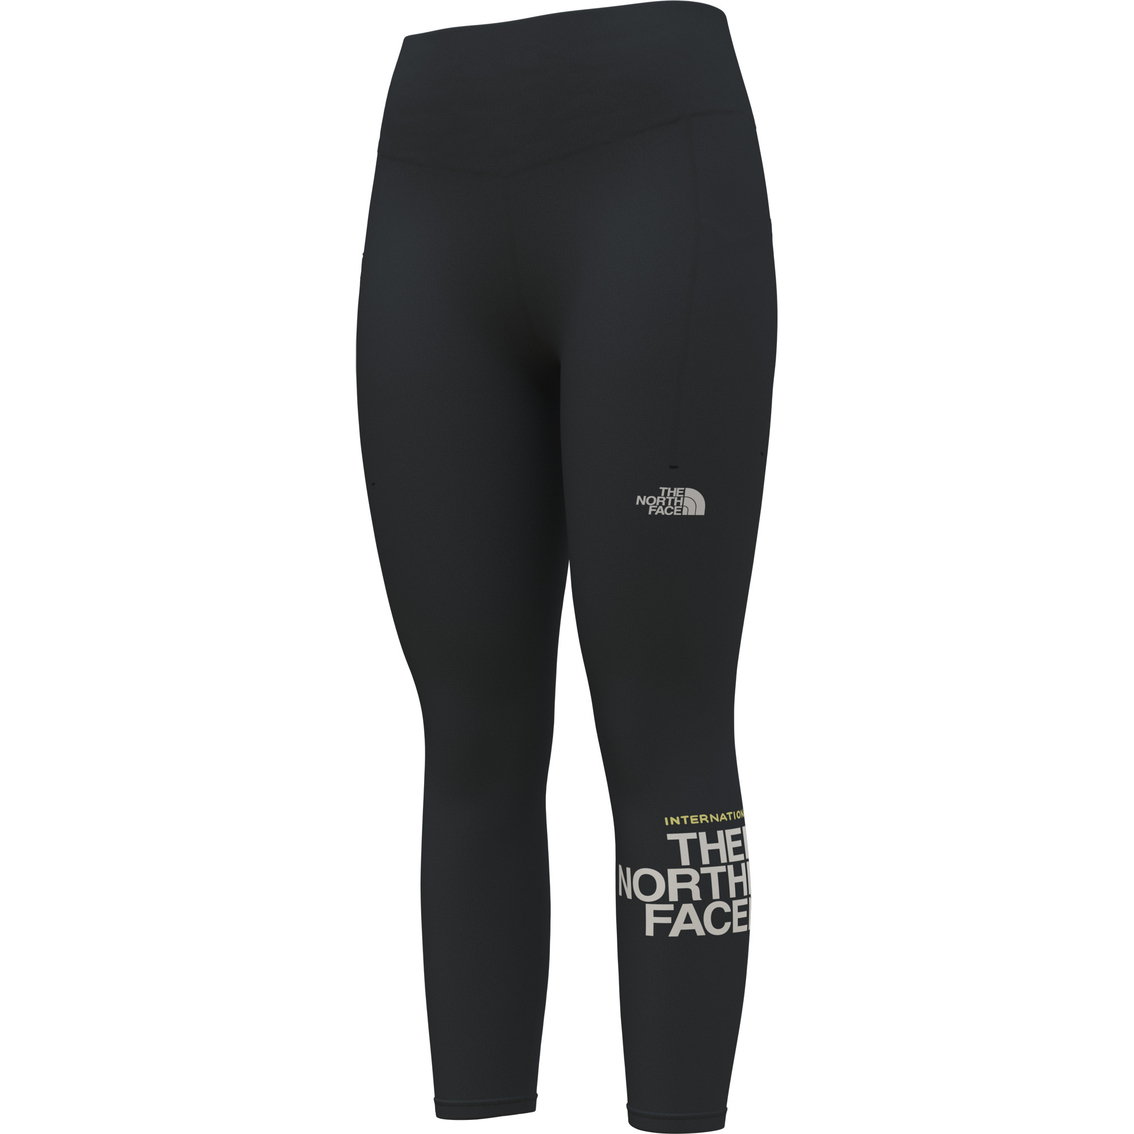 The North Face Printed Midline High Rise Pocket 7/8 Leggings, Leggings, Clothing & Accessories